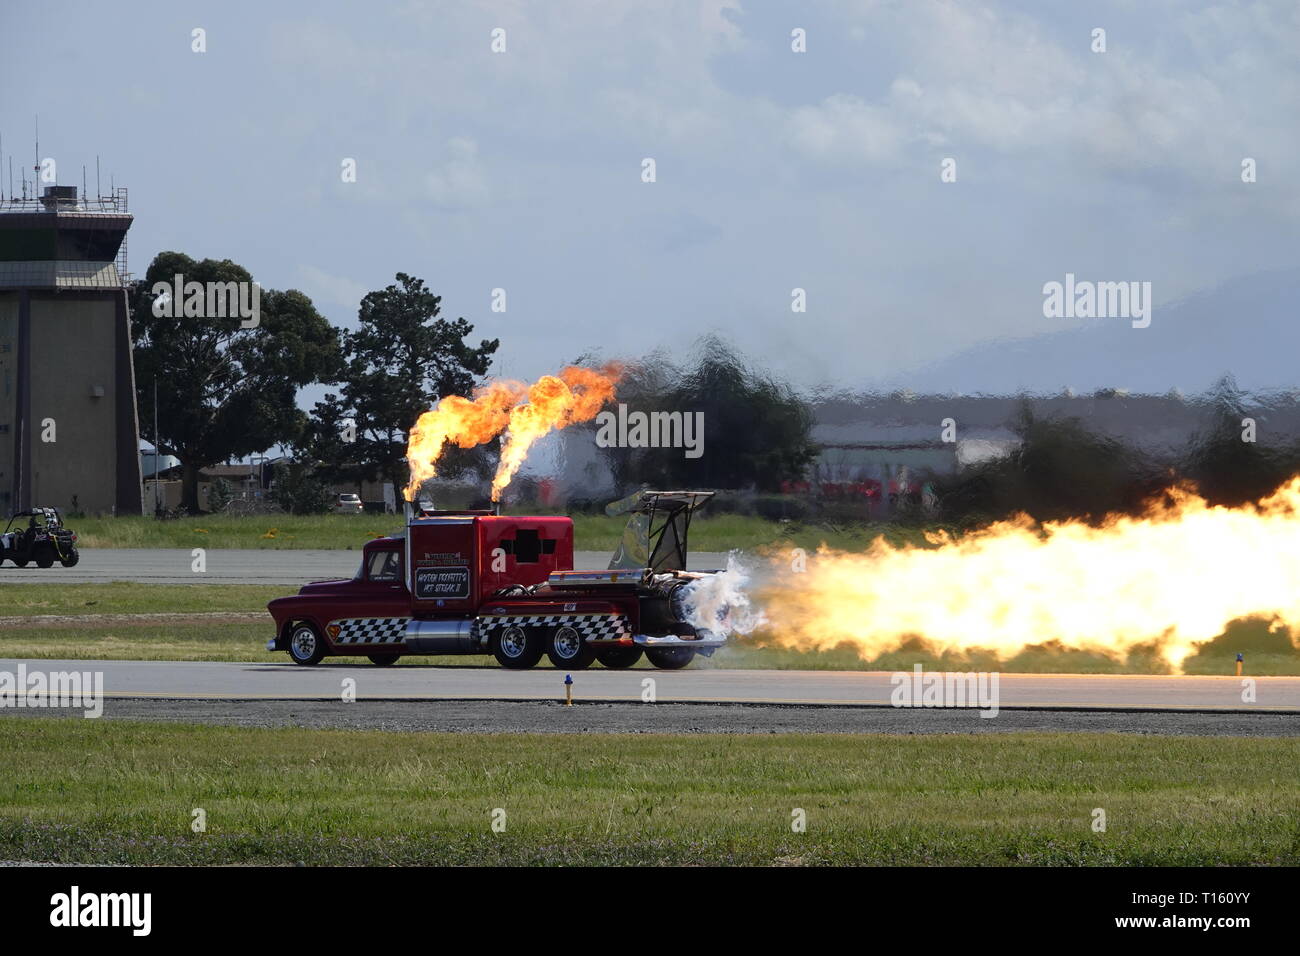 California, USA. 23rd Mar, 2019. 23rd March, 2019   Salinas, California, USA      Scenes from the annual  Salinas Air-Show, featuring the US Navy 'Blue Angels' arobatic team - here the 'Smoke and Thunder' Jet truck burns oil, and gas to an alarming degree. Credit: Motofoto/Alamy Live News Stock Photo